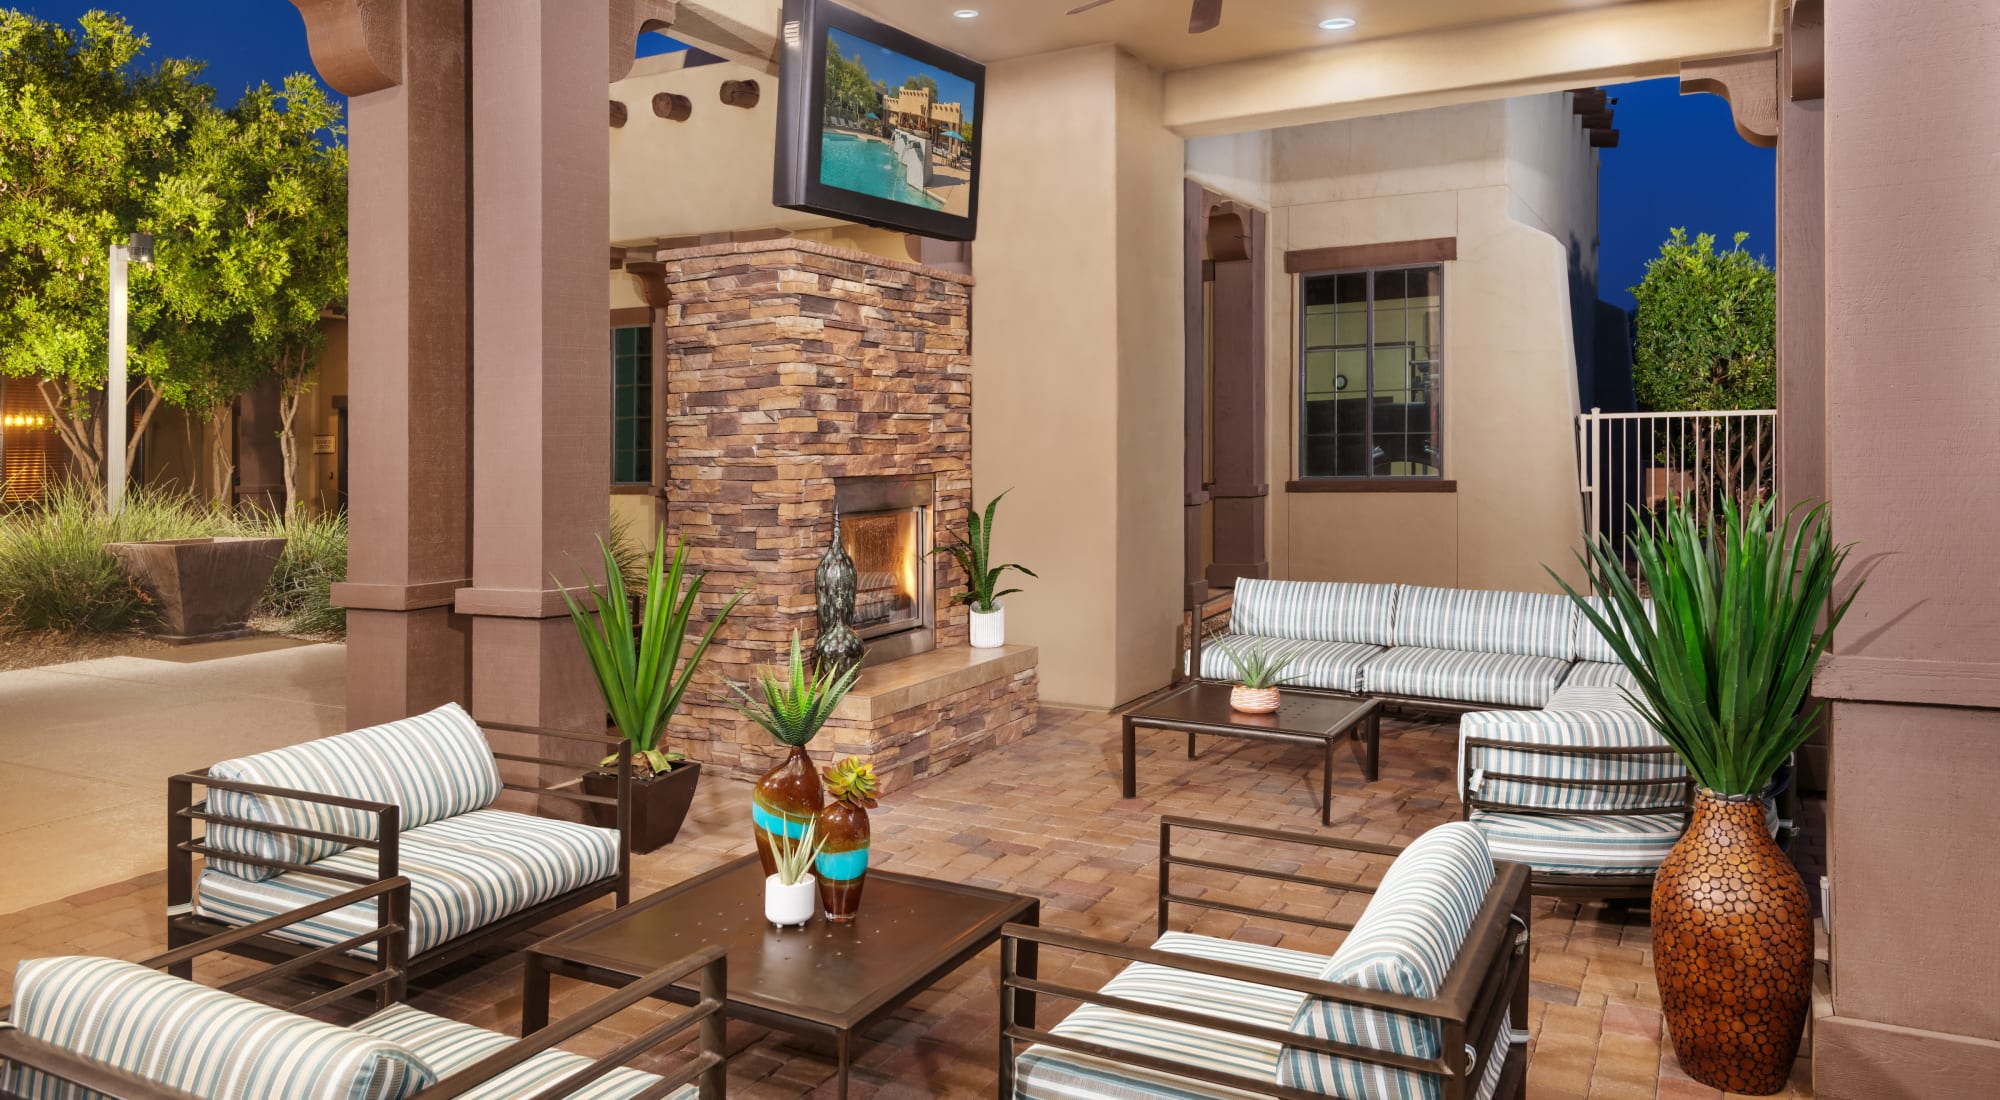 Clubhouse community space at Las Colinas at Black Canyon in Phoenix, Arizona